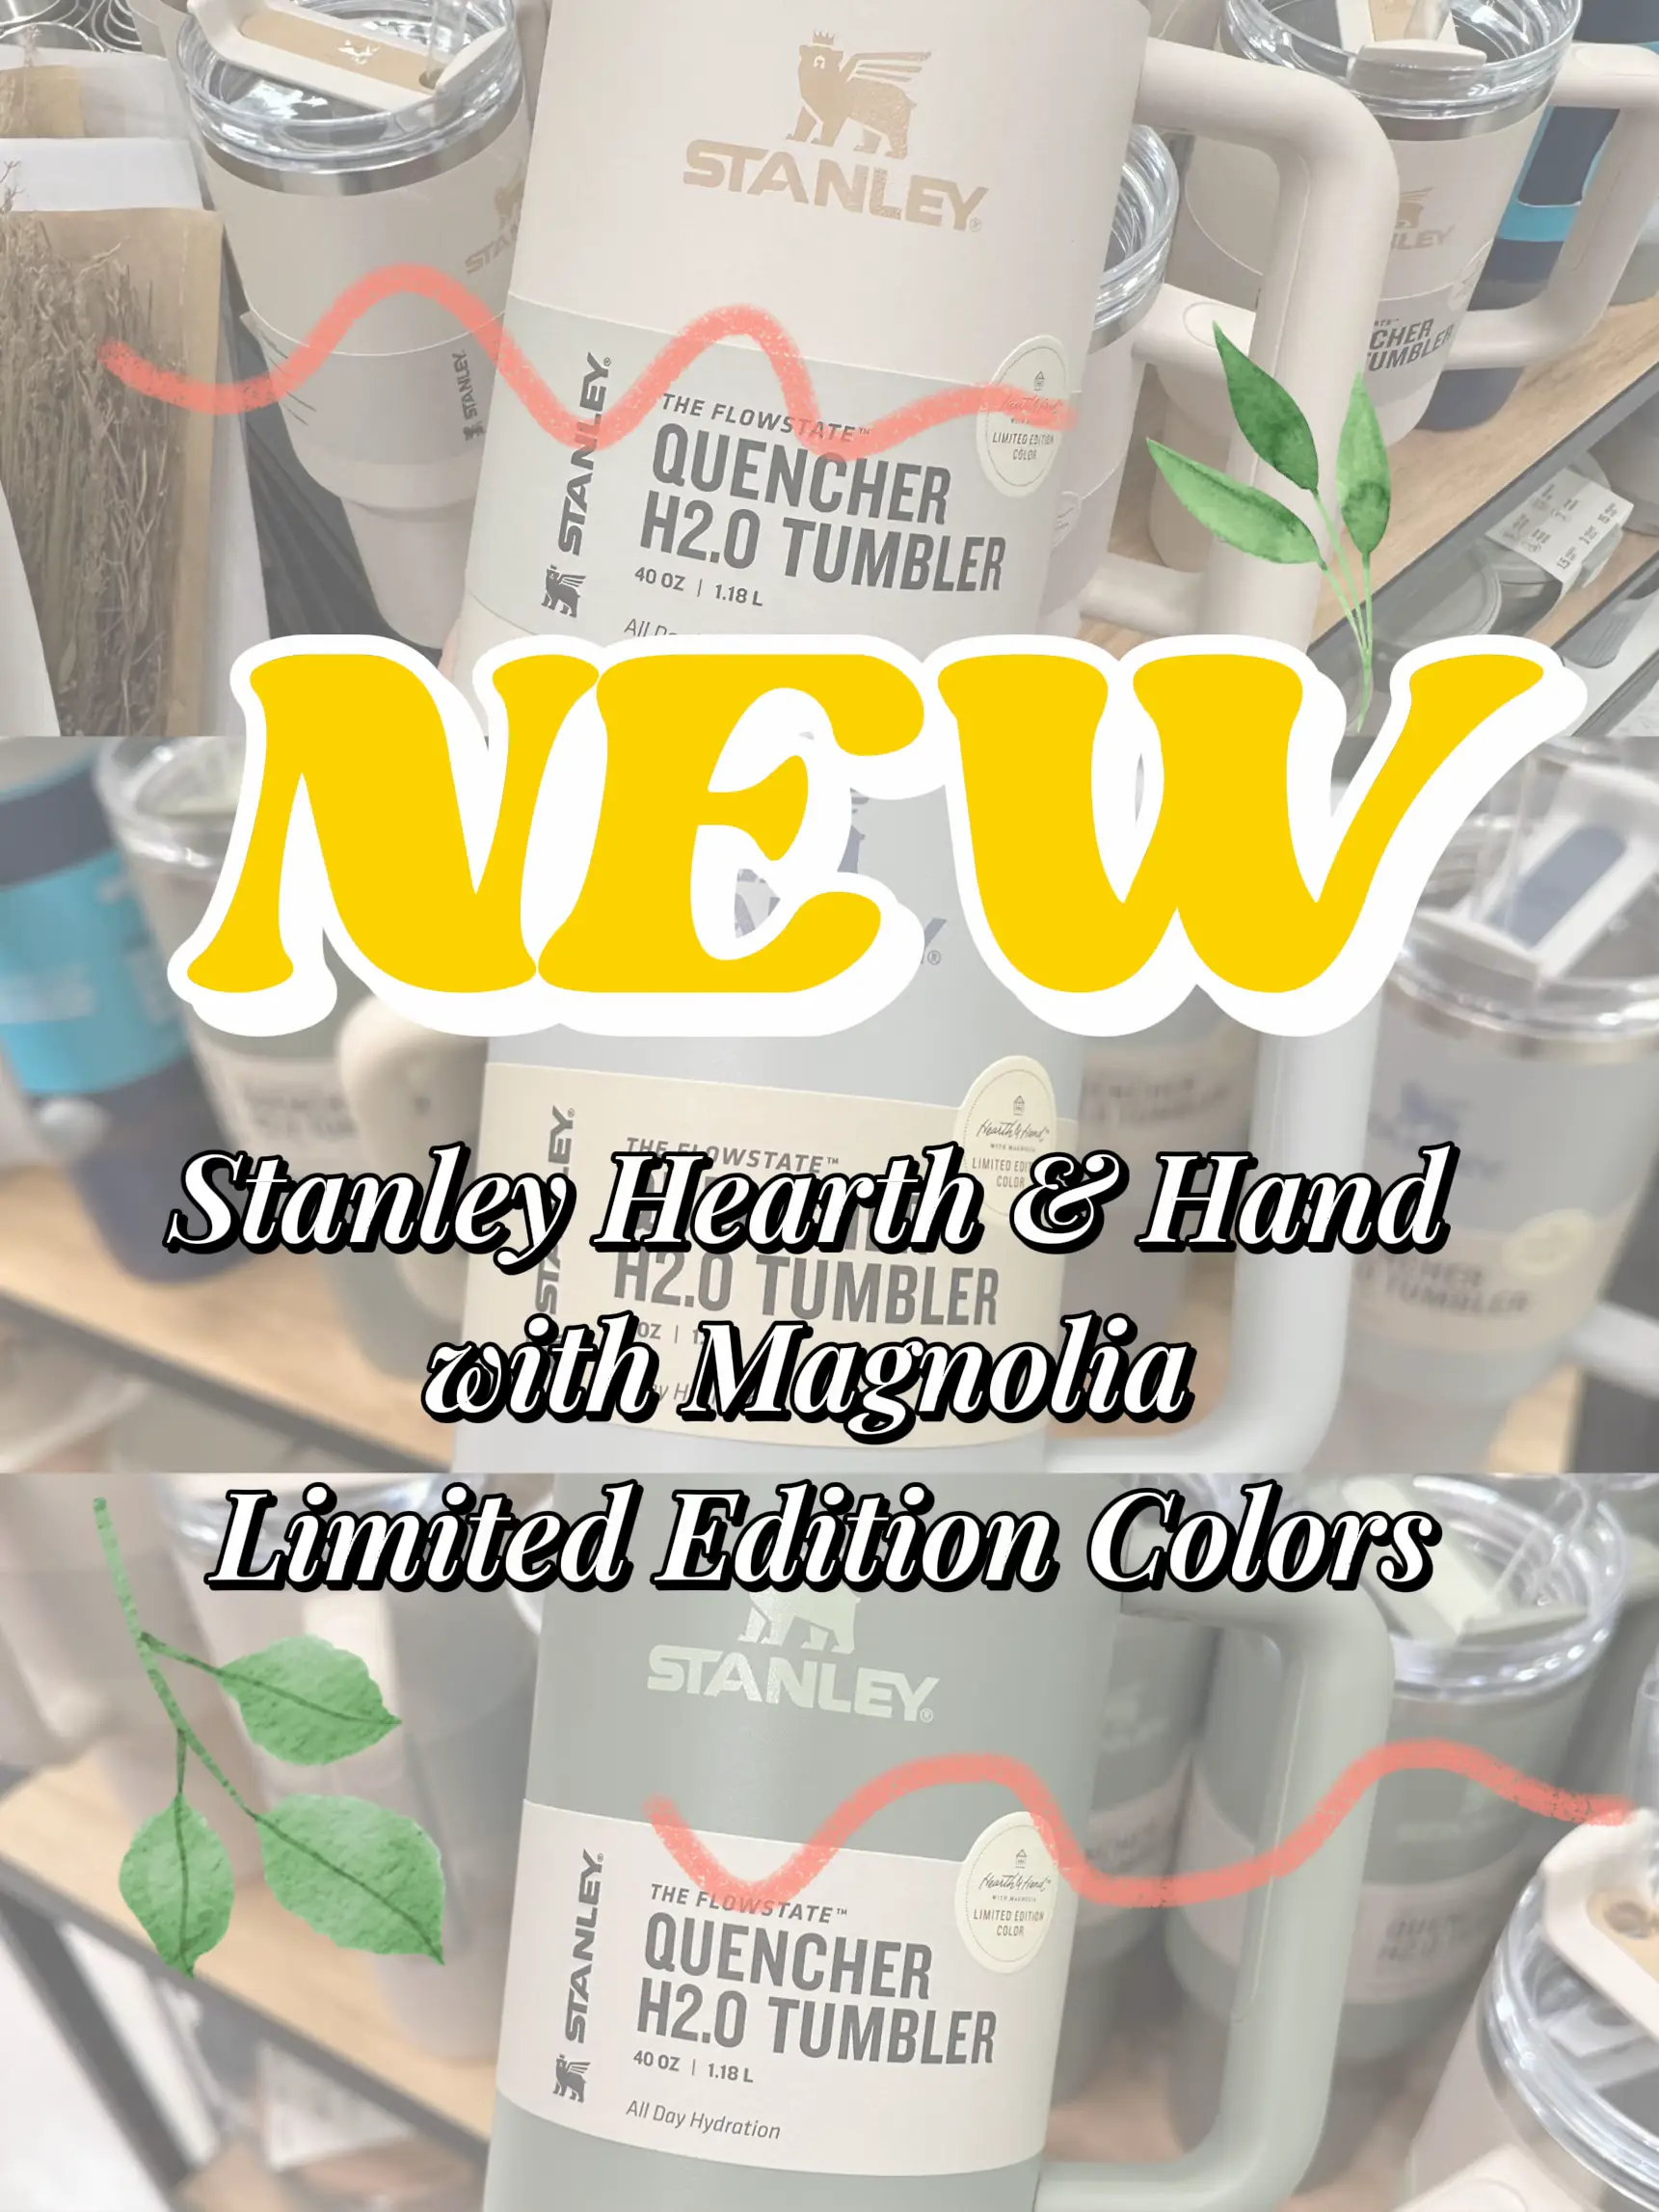 NEW COLORS! Stanley X Hearth & Hand By Magnolia!